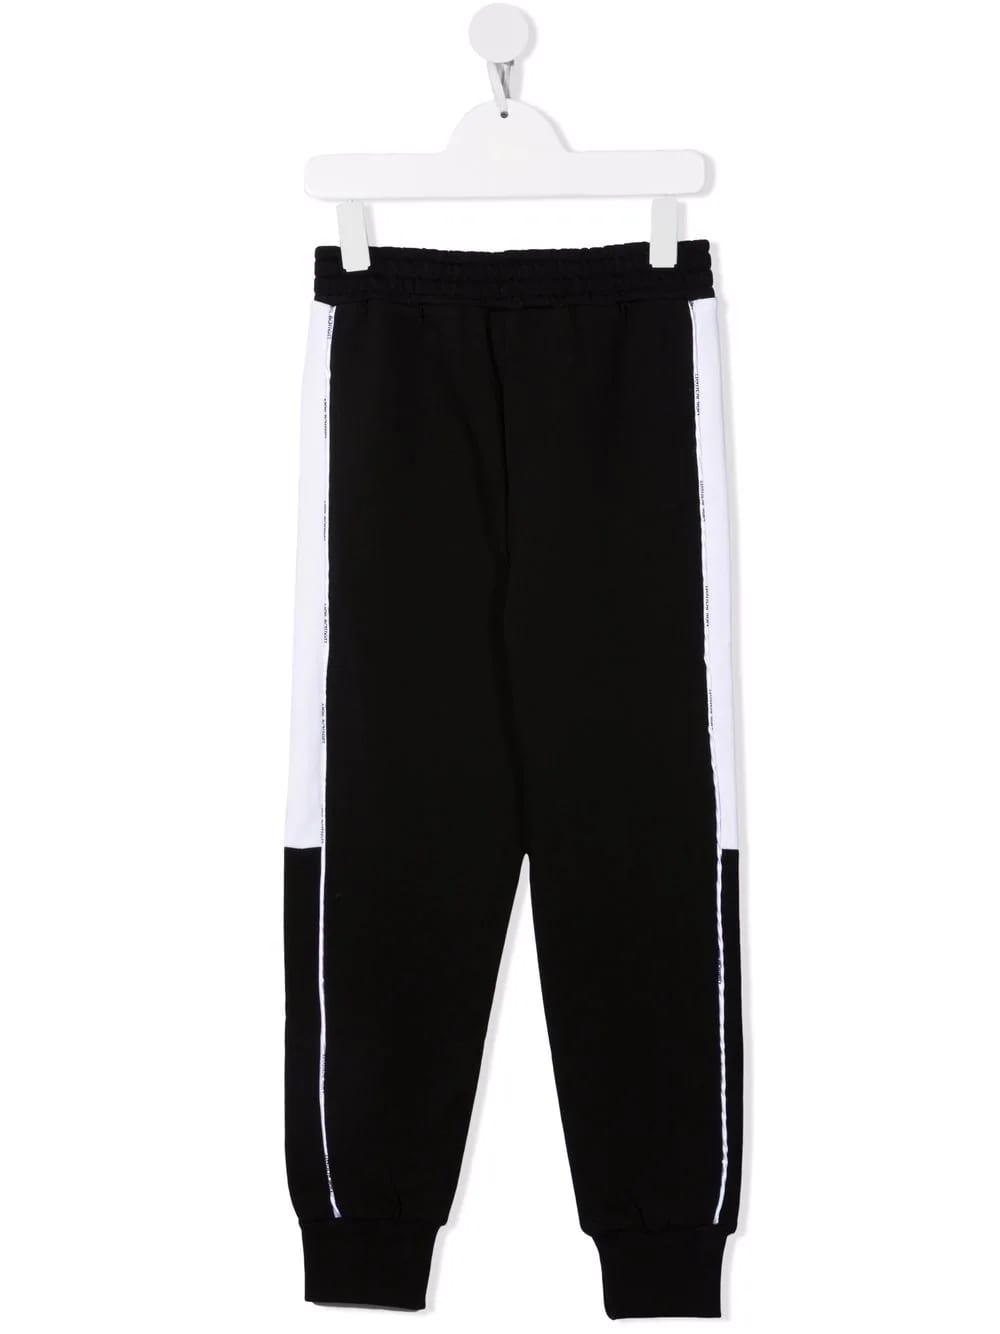 Neil Barrett Kids Black Joggers With Contrast Bands